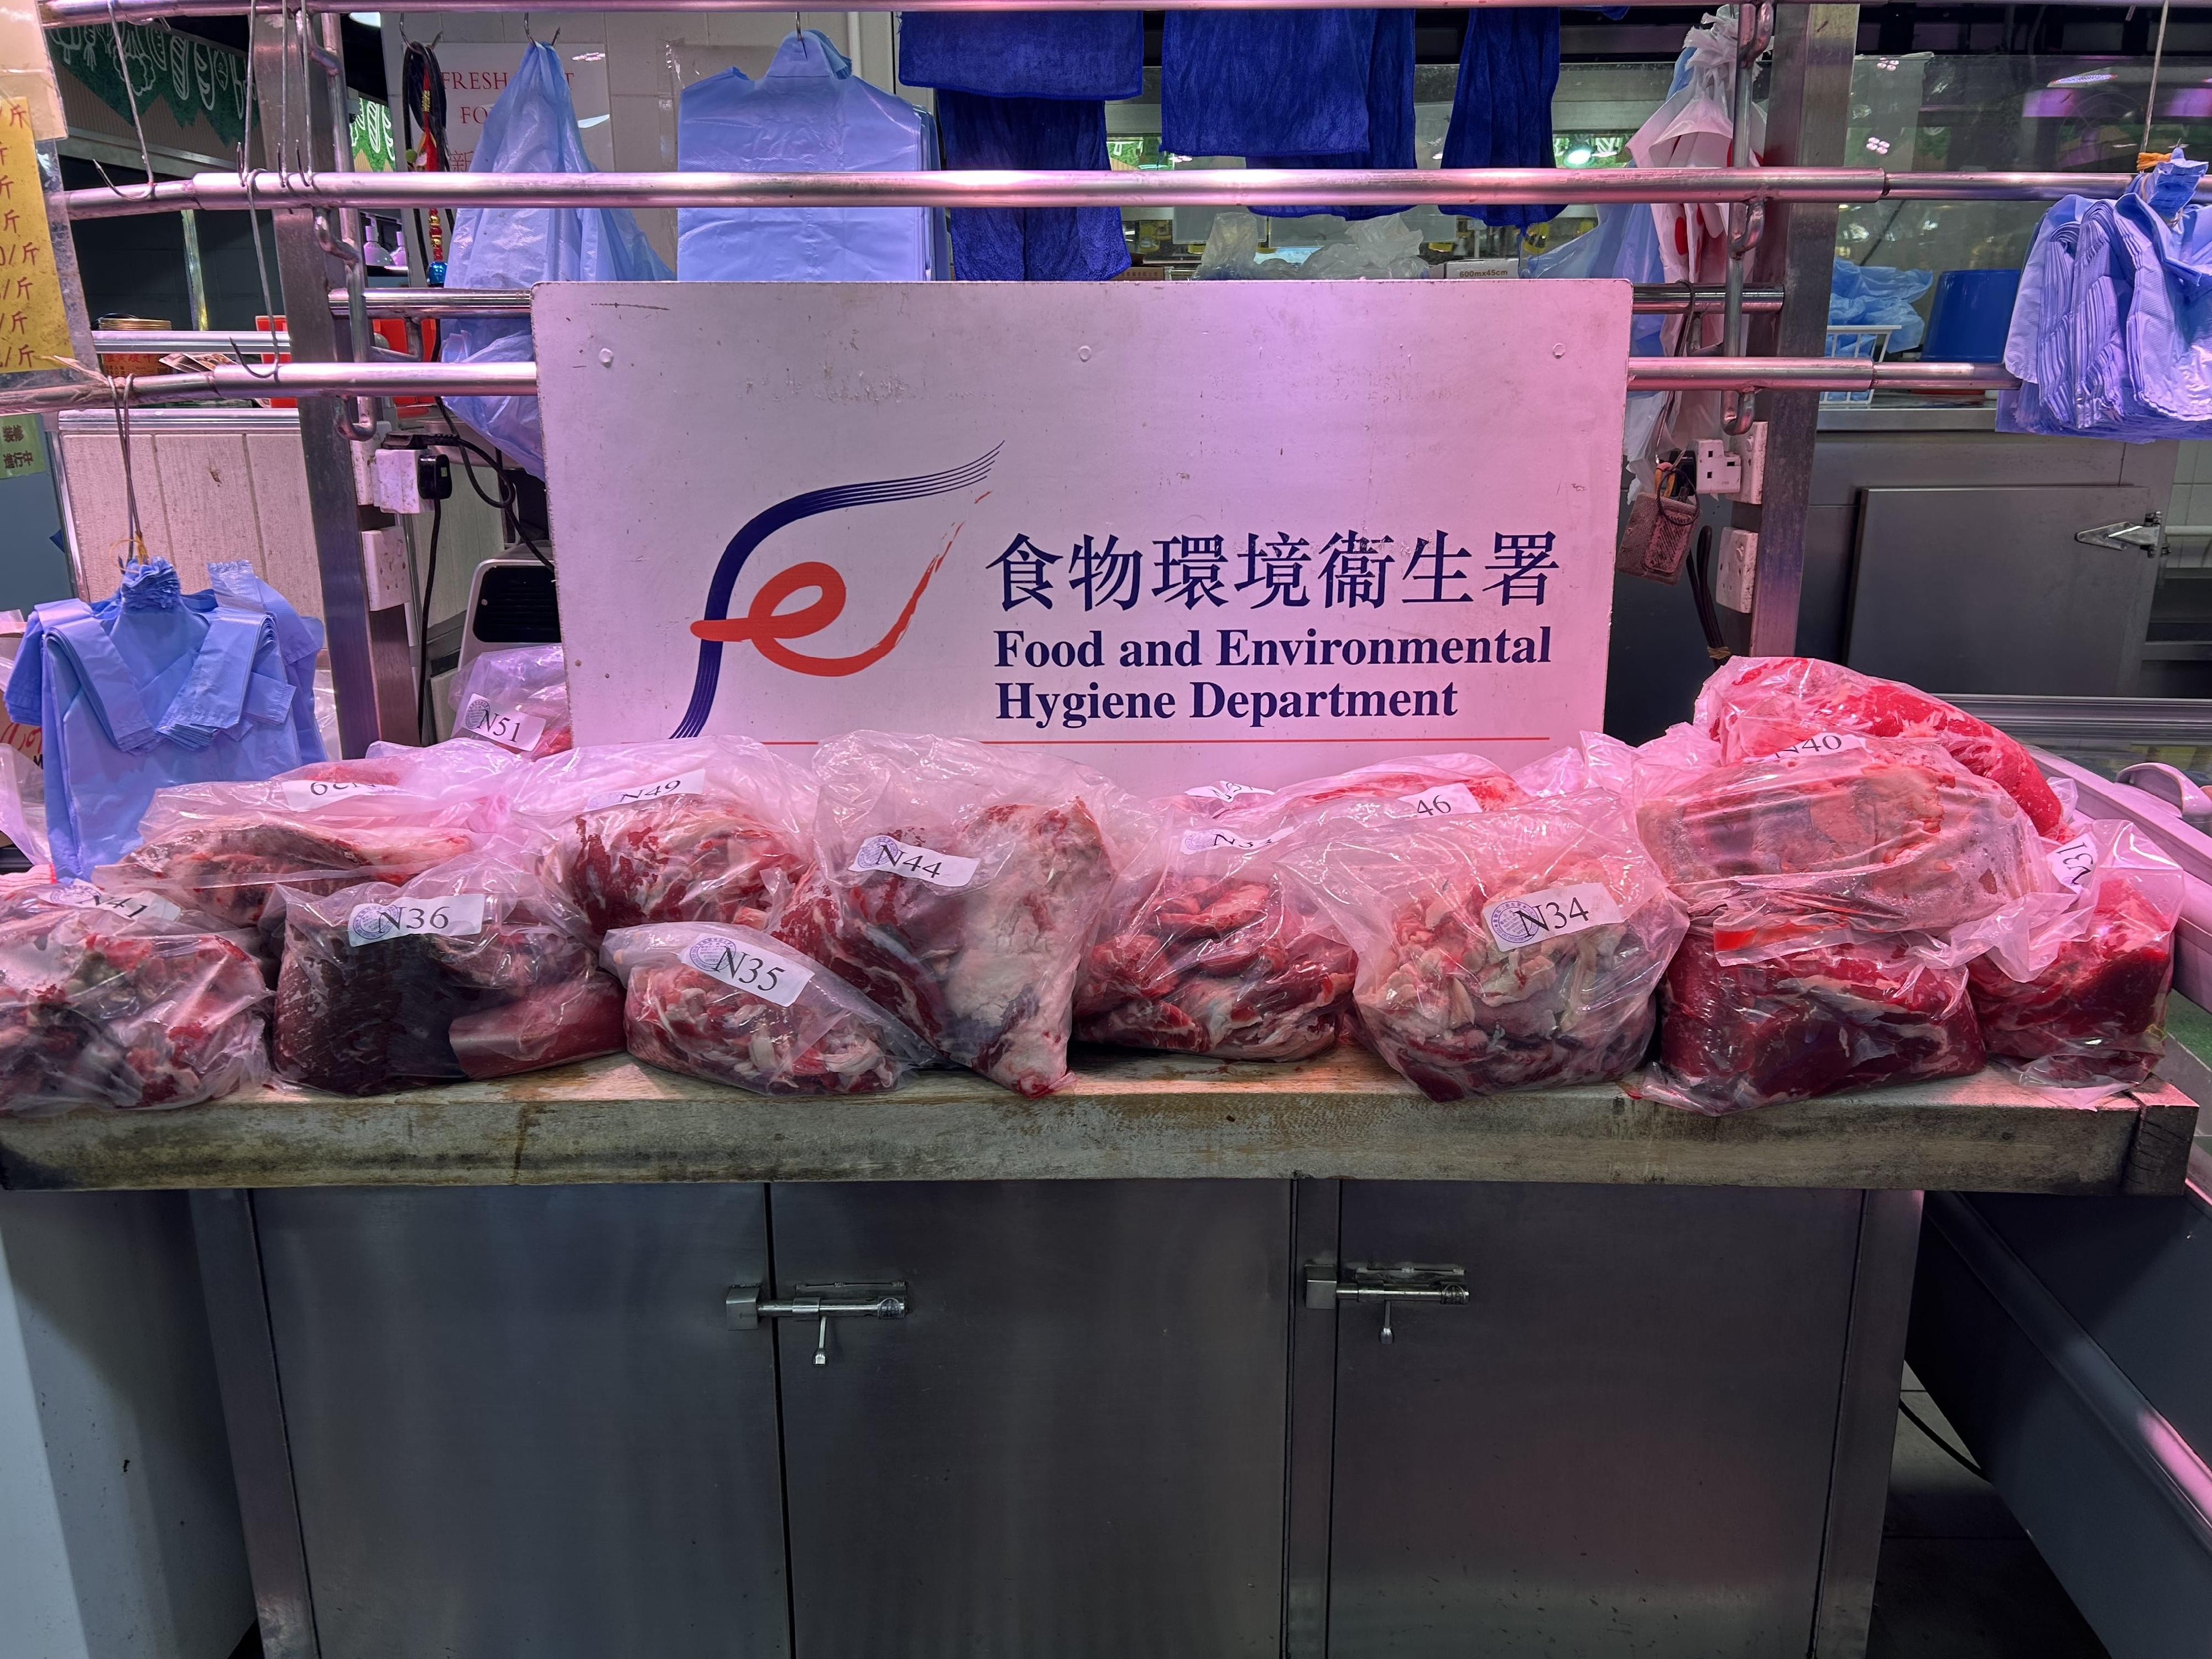 The Food and Environmental Hygiene Department (FEHD) has long been committed to combating the sale of chilled or frozen meat disguised as fresh meat, and raided a licensed fresh provision shop in North District suspected of selling frozen meat as fresh meat today (June 27). Photo shows some of the meat seized by FEHD officers during the operation.